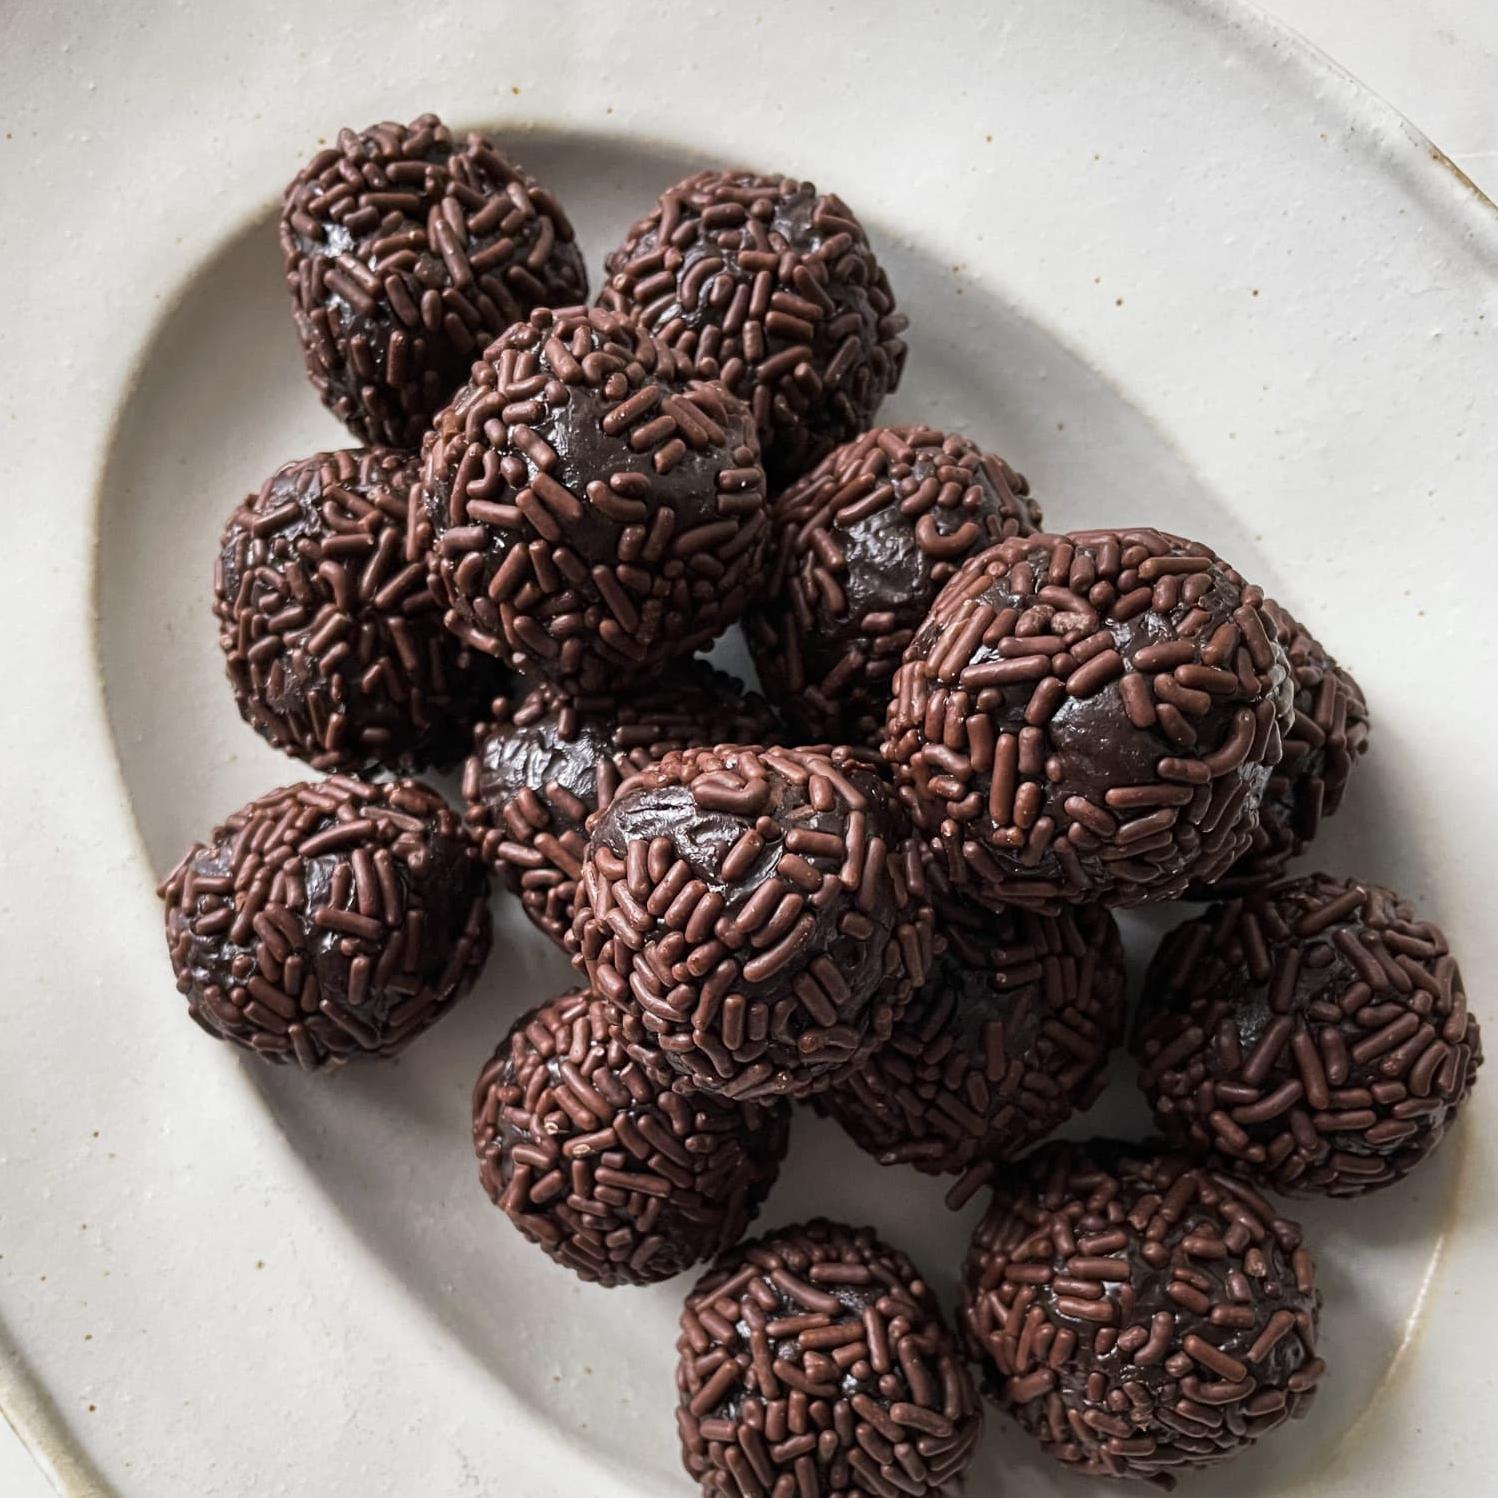  Calling all chocoholics! This recipe is for you.